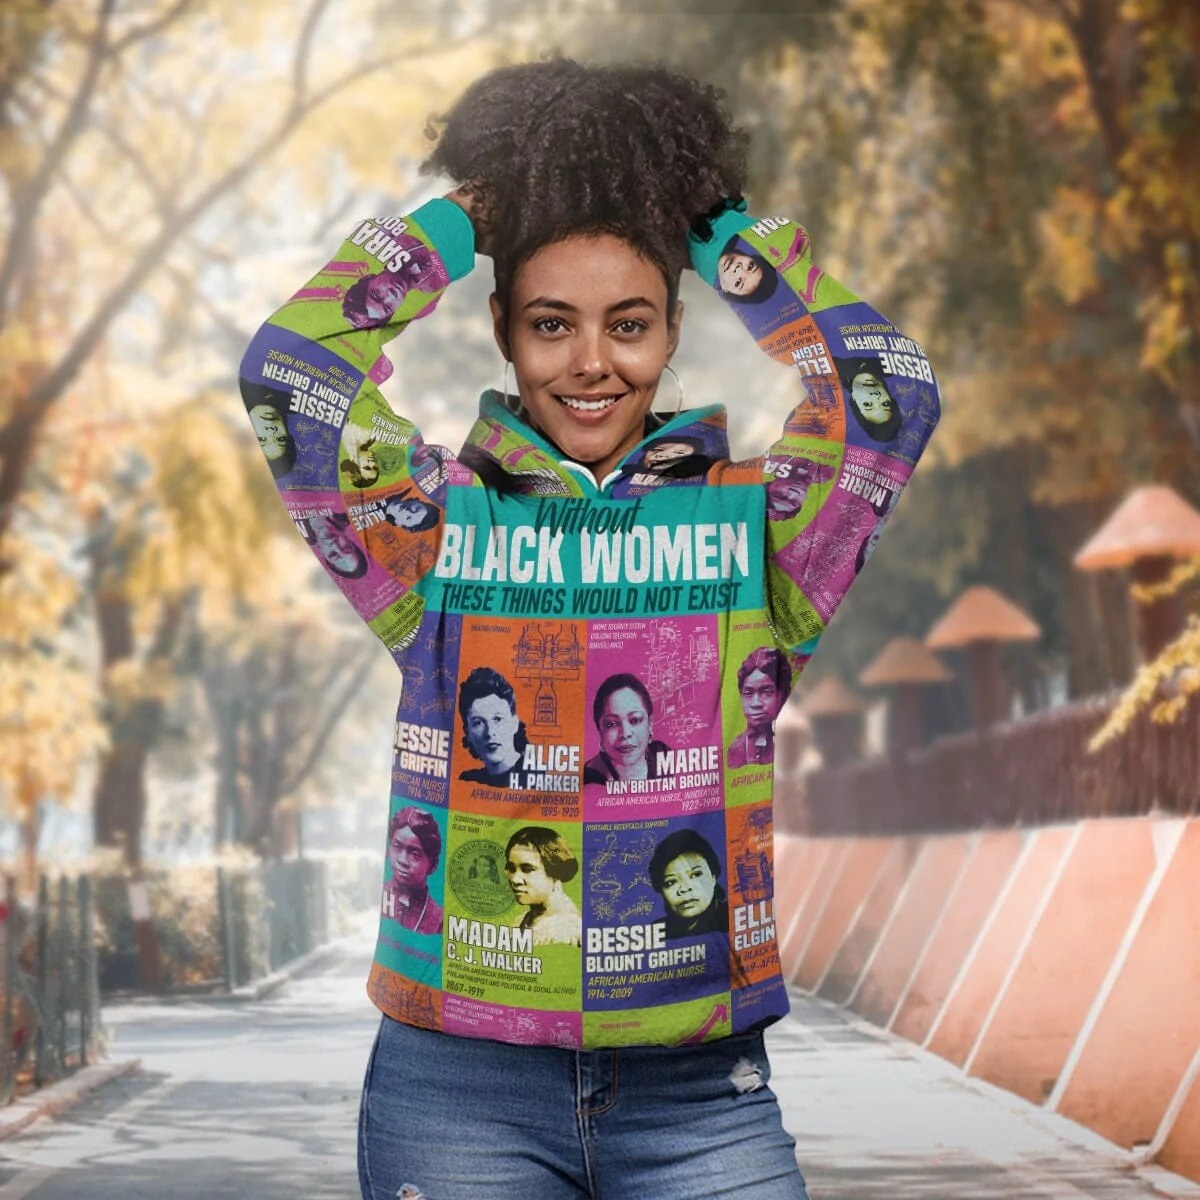 A woman wearing a sweatshirt covered in greats like Madam CJ Walker and Alice H Parker